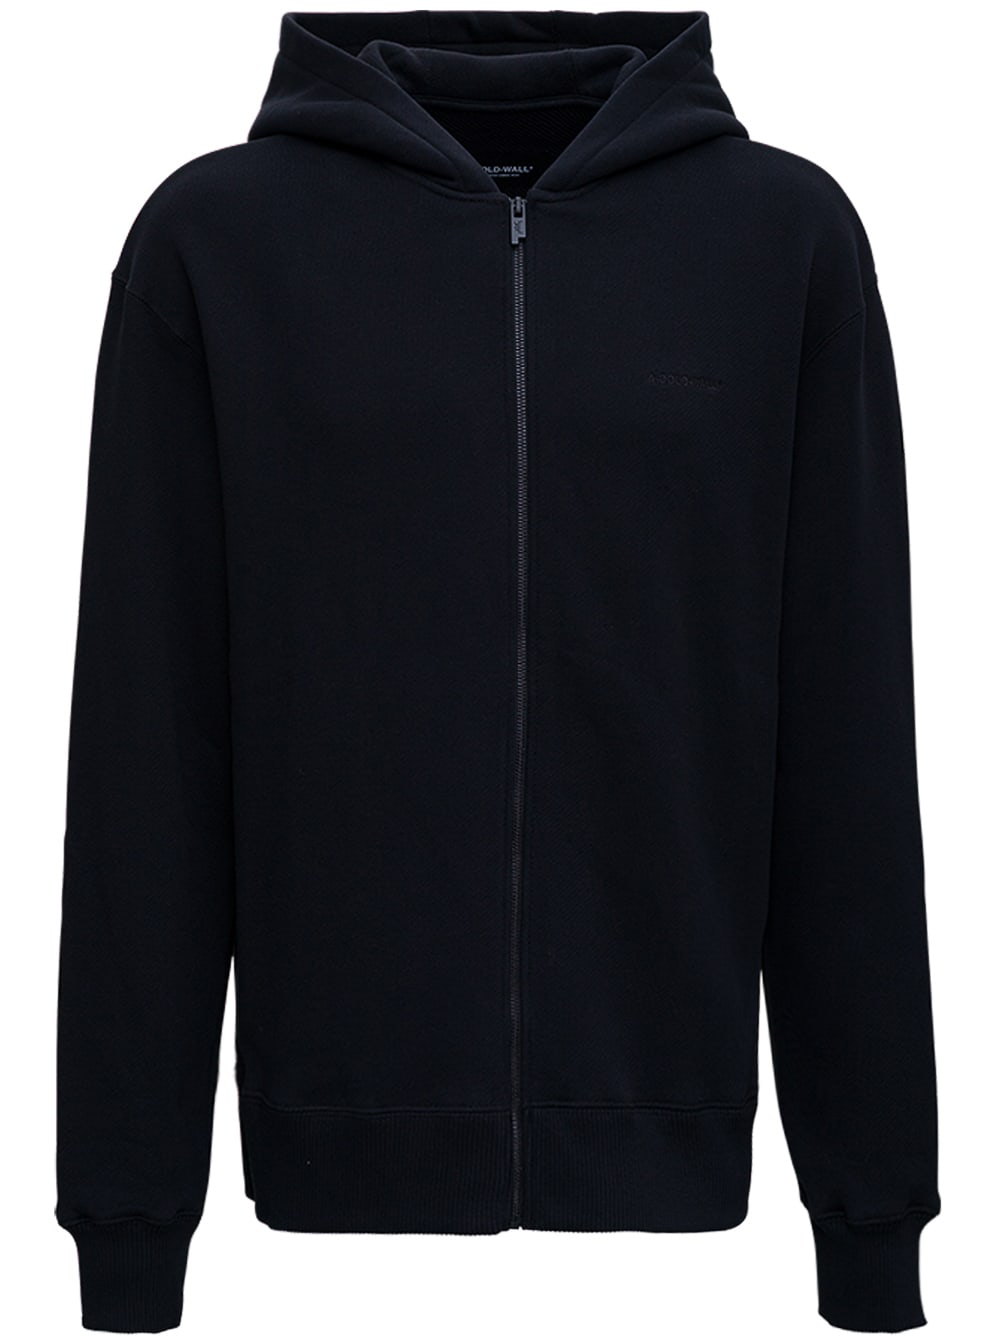 A-COLD-WALL Black Jersey Hoodie With Logo